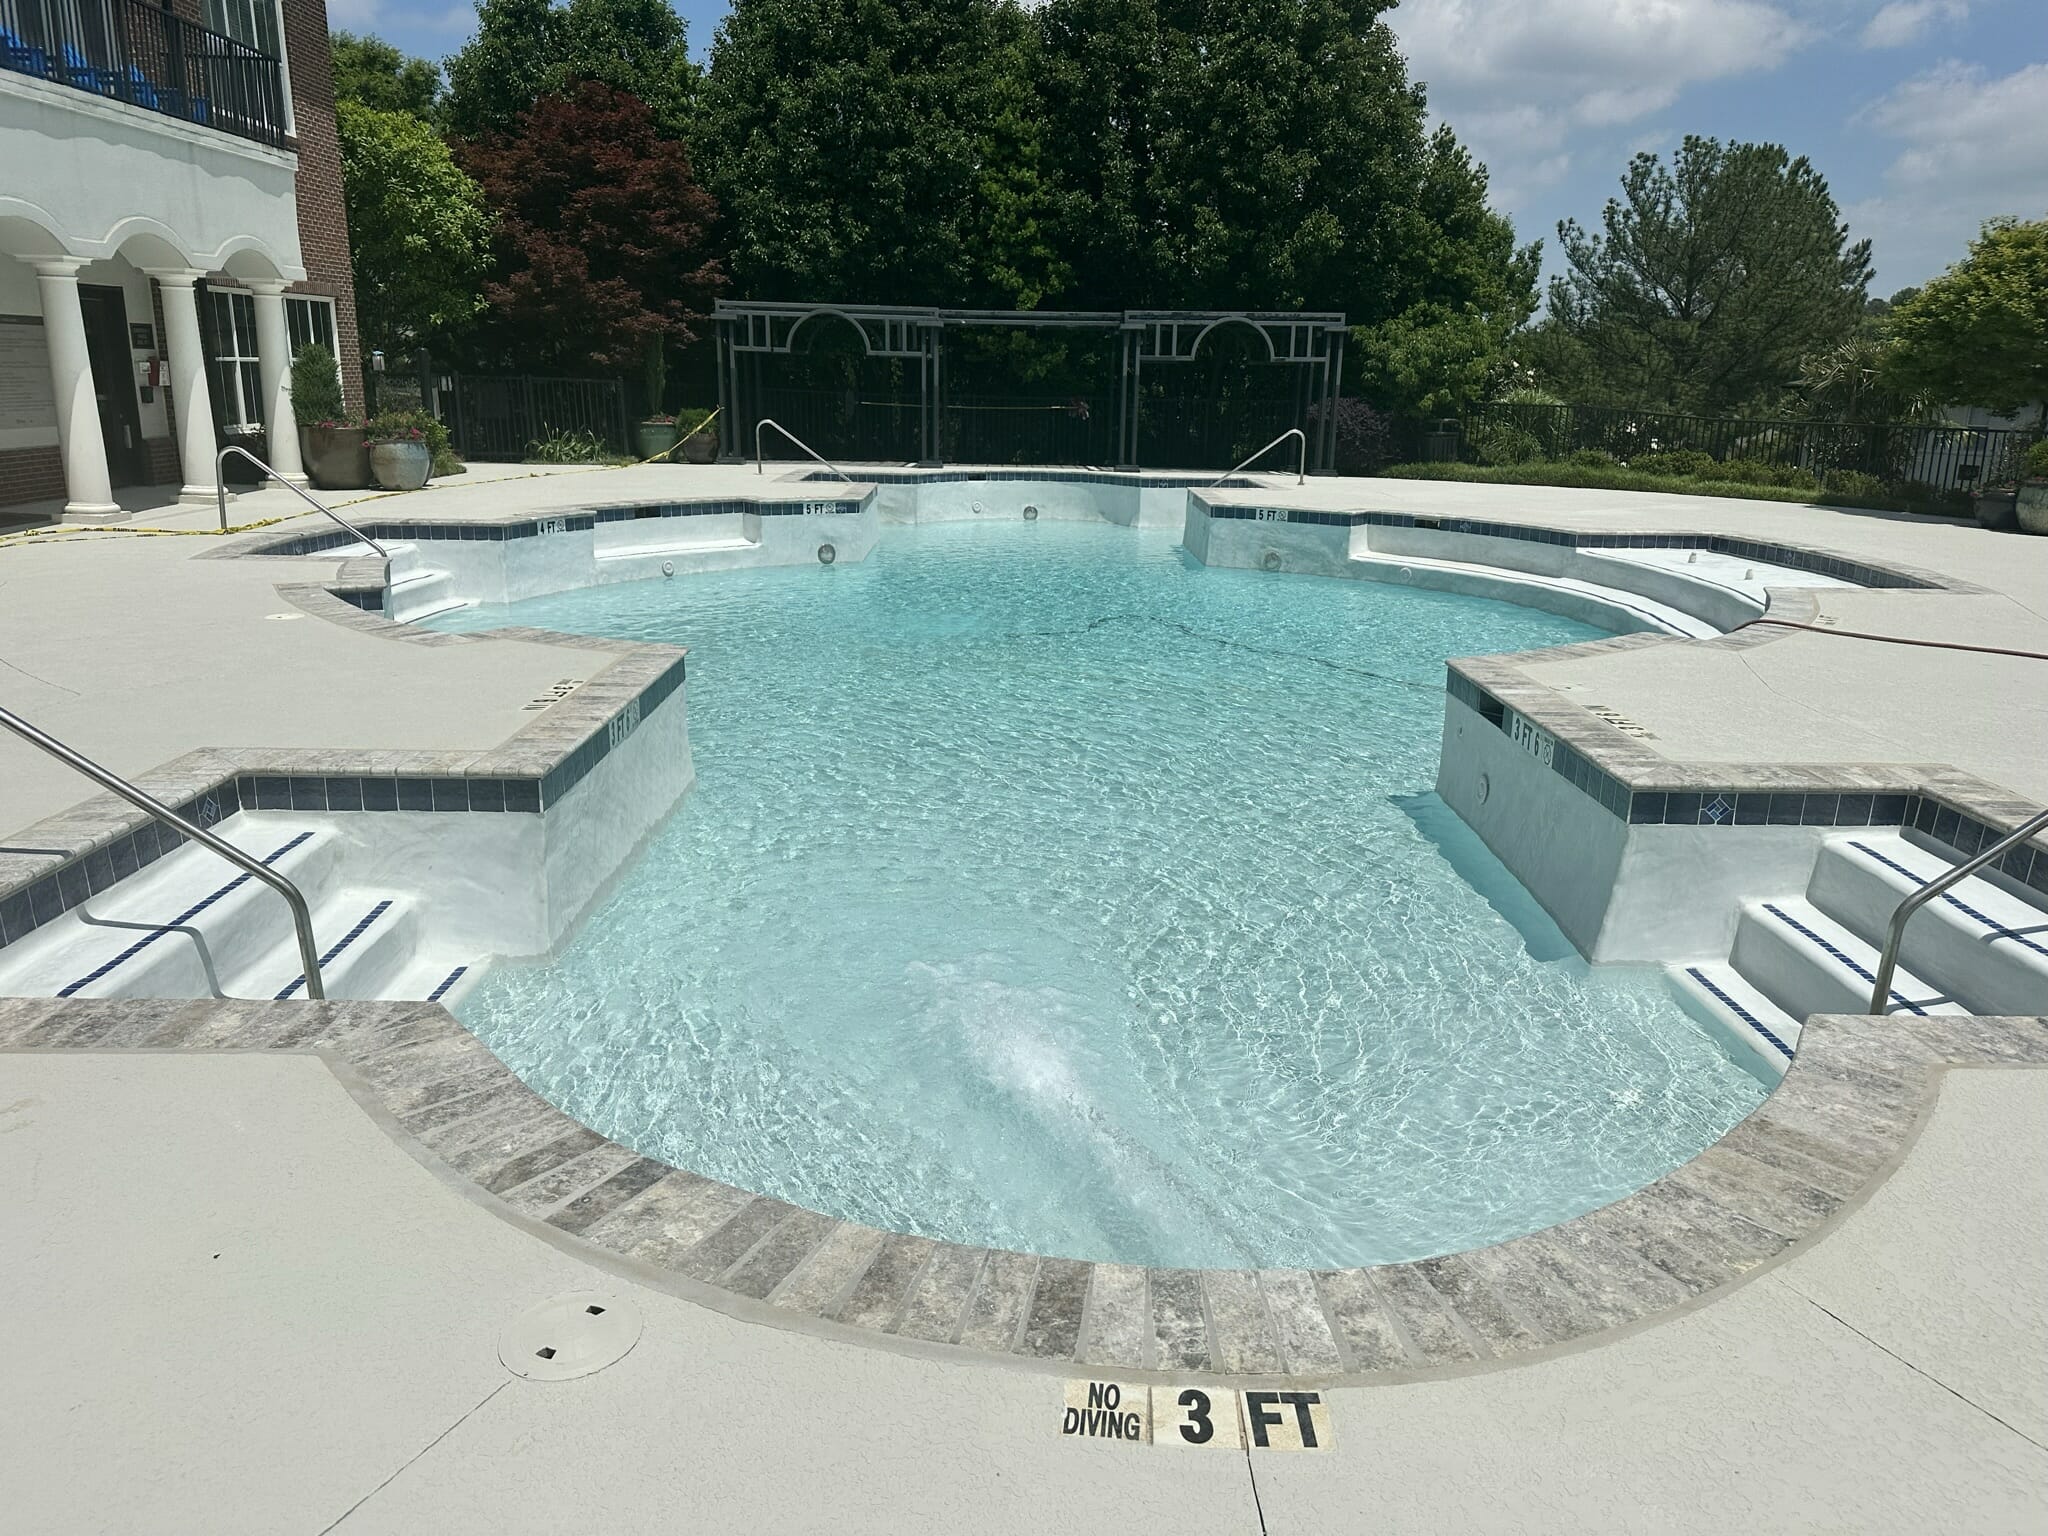 Expert Pool Cleaning Services"